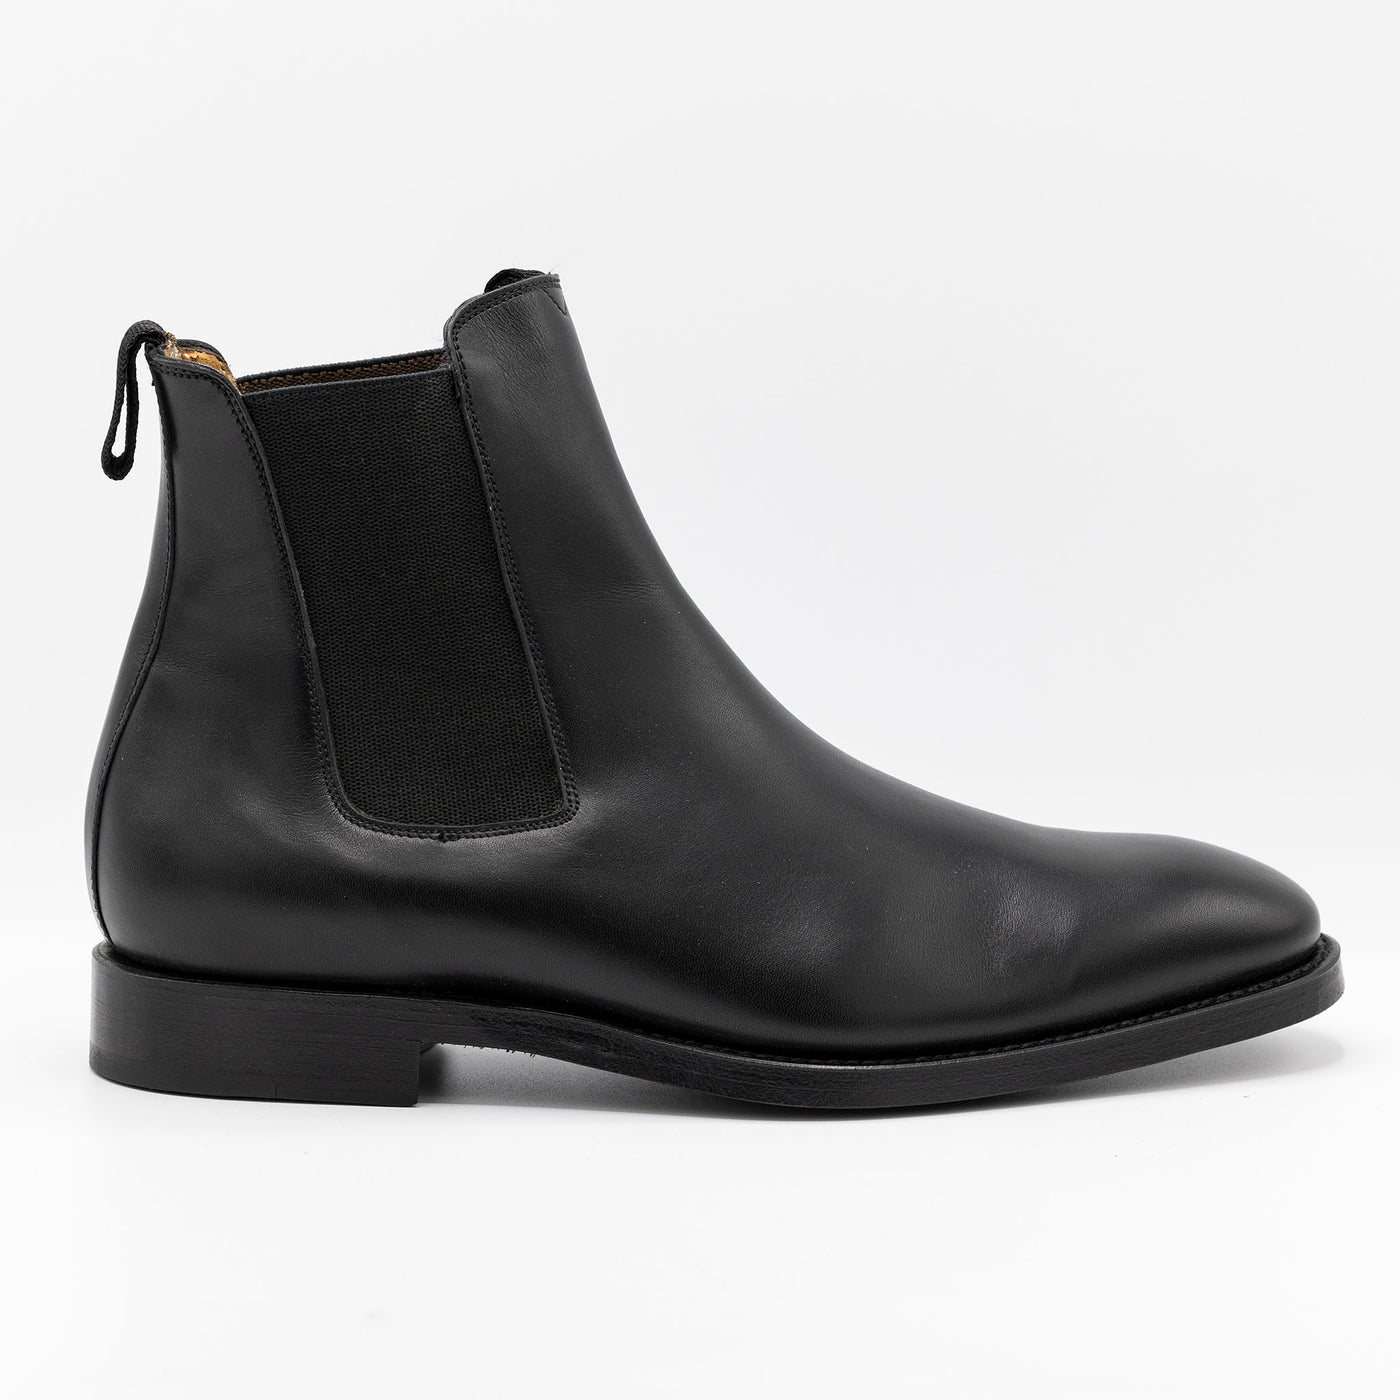 CHELSEA BOOTS in BLACK LEATHER